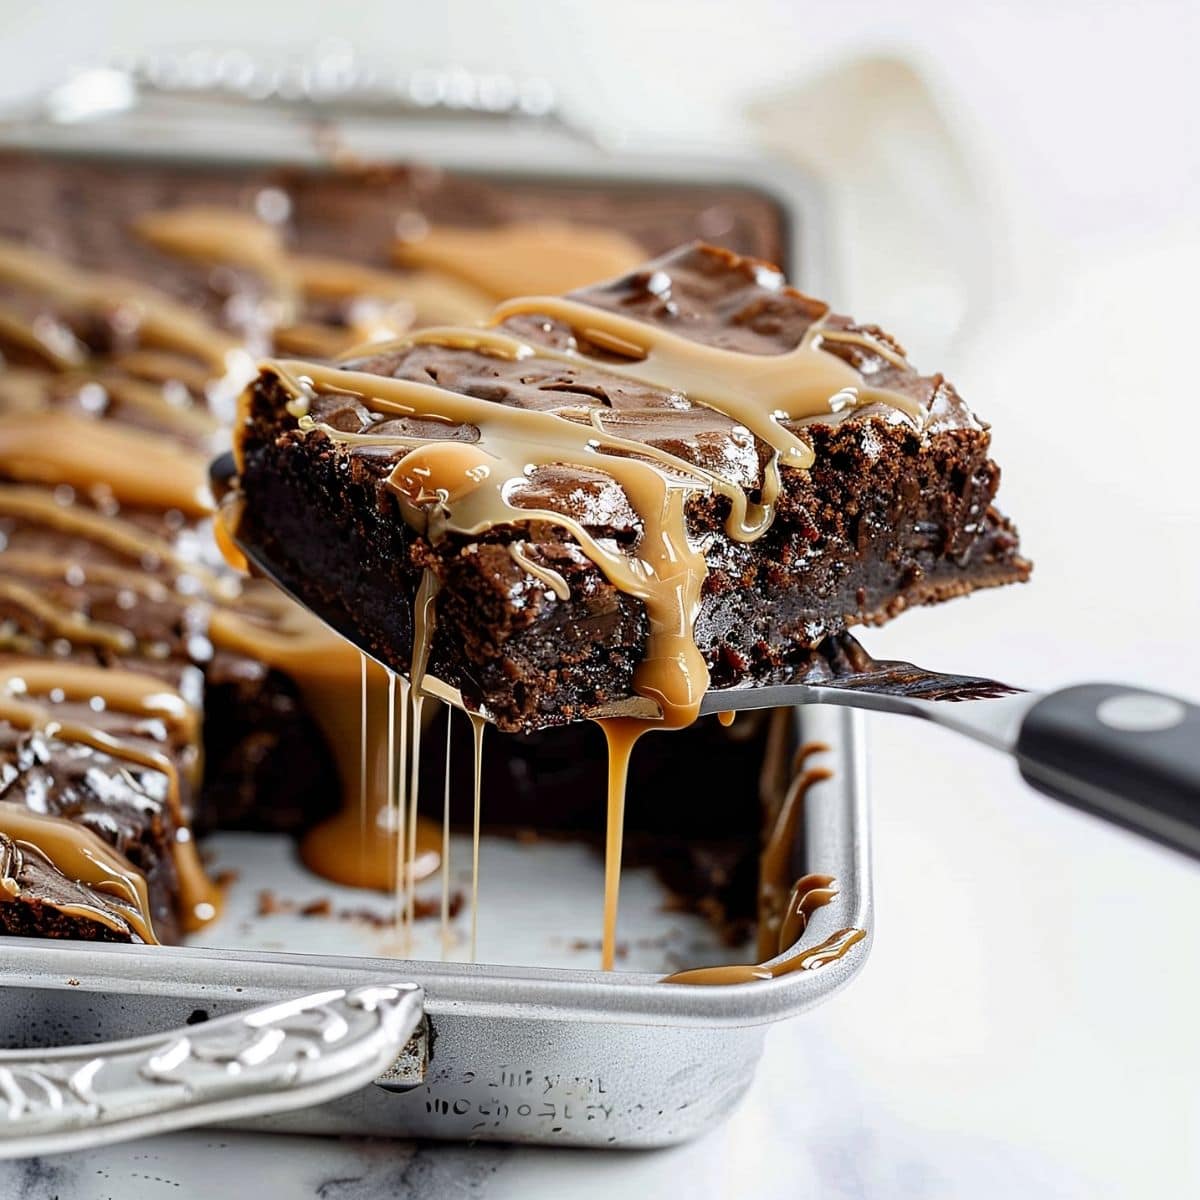 Spatula Holding Up a Caramel Brownie Square Dripping Caramel over a Baking Sheet of More Caramel Brownies